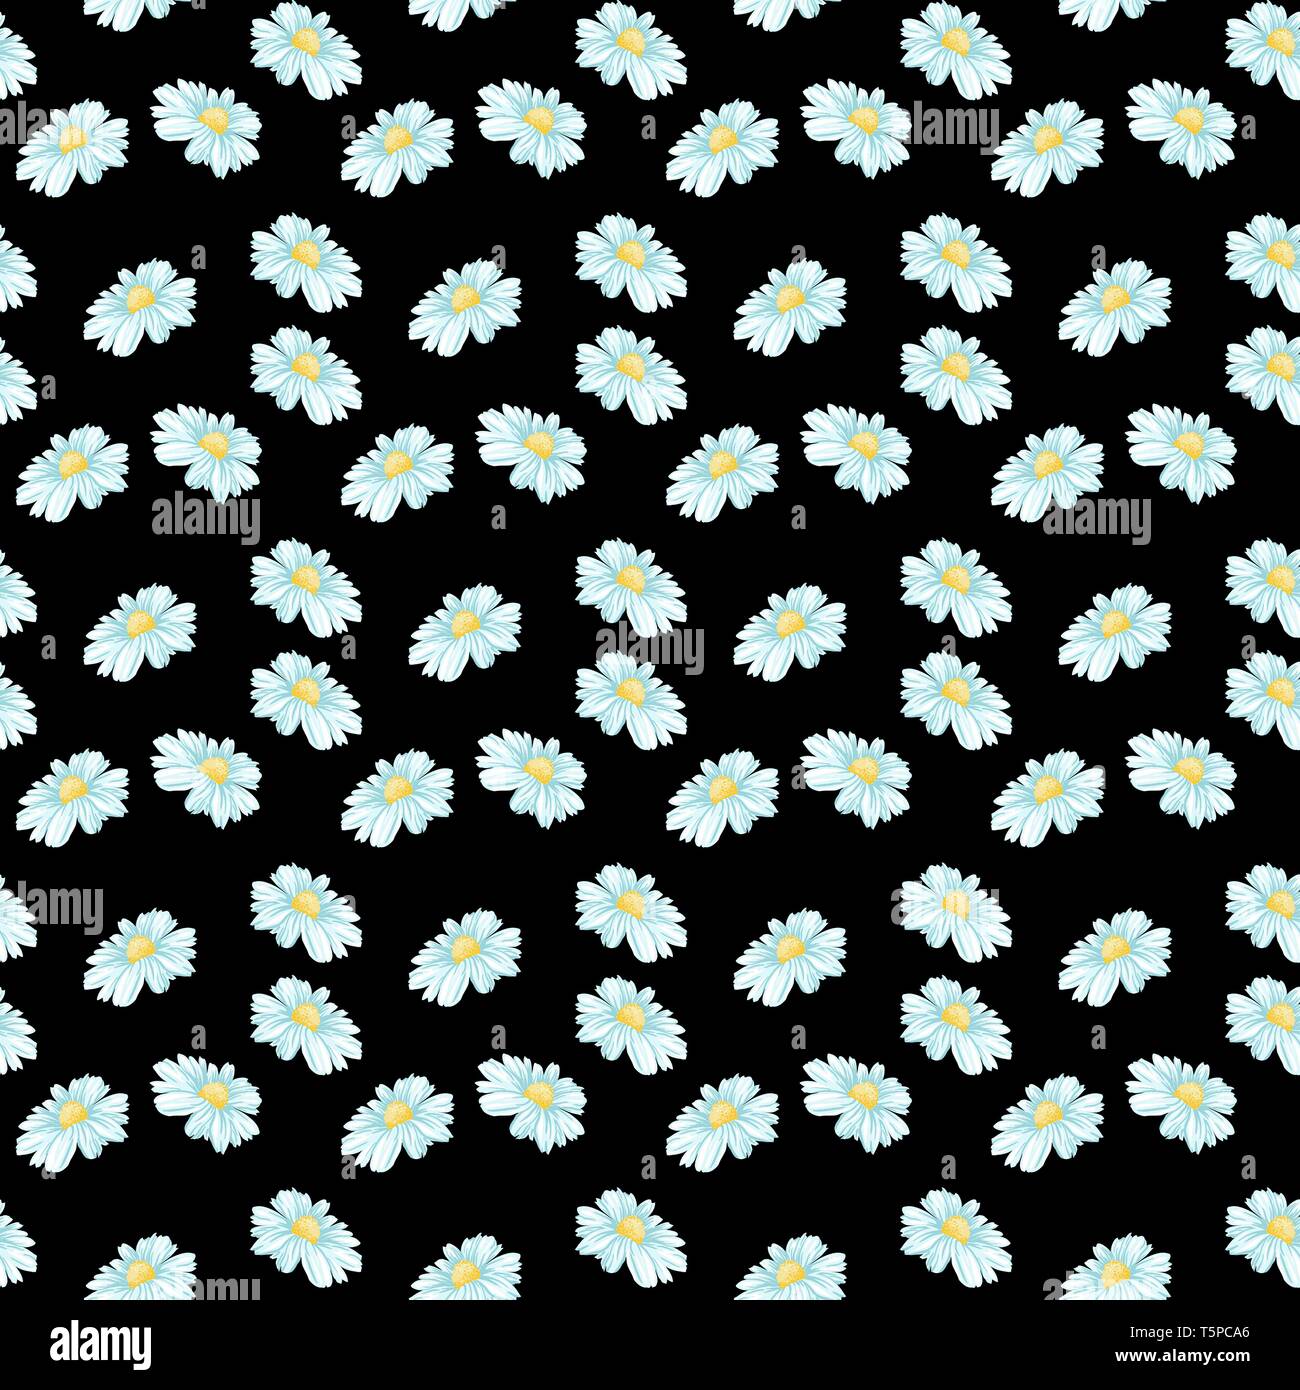 Daisy or Chamomile Tea Herb Flower Seamless Pattern. Herbal Therapy Wallpaper. Botany Plant, Matricaria Loose Herbs. Floral Blossom on Black Background Stock Vector